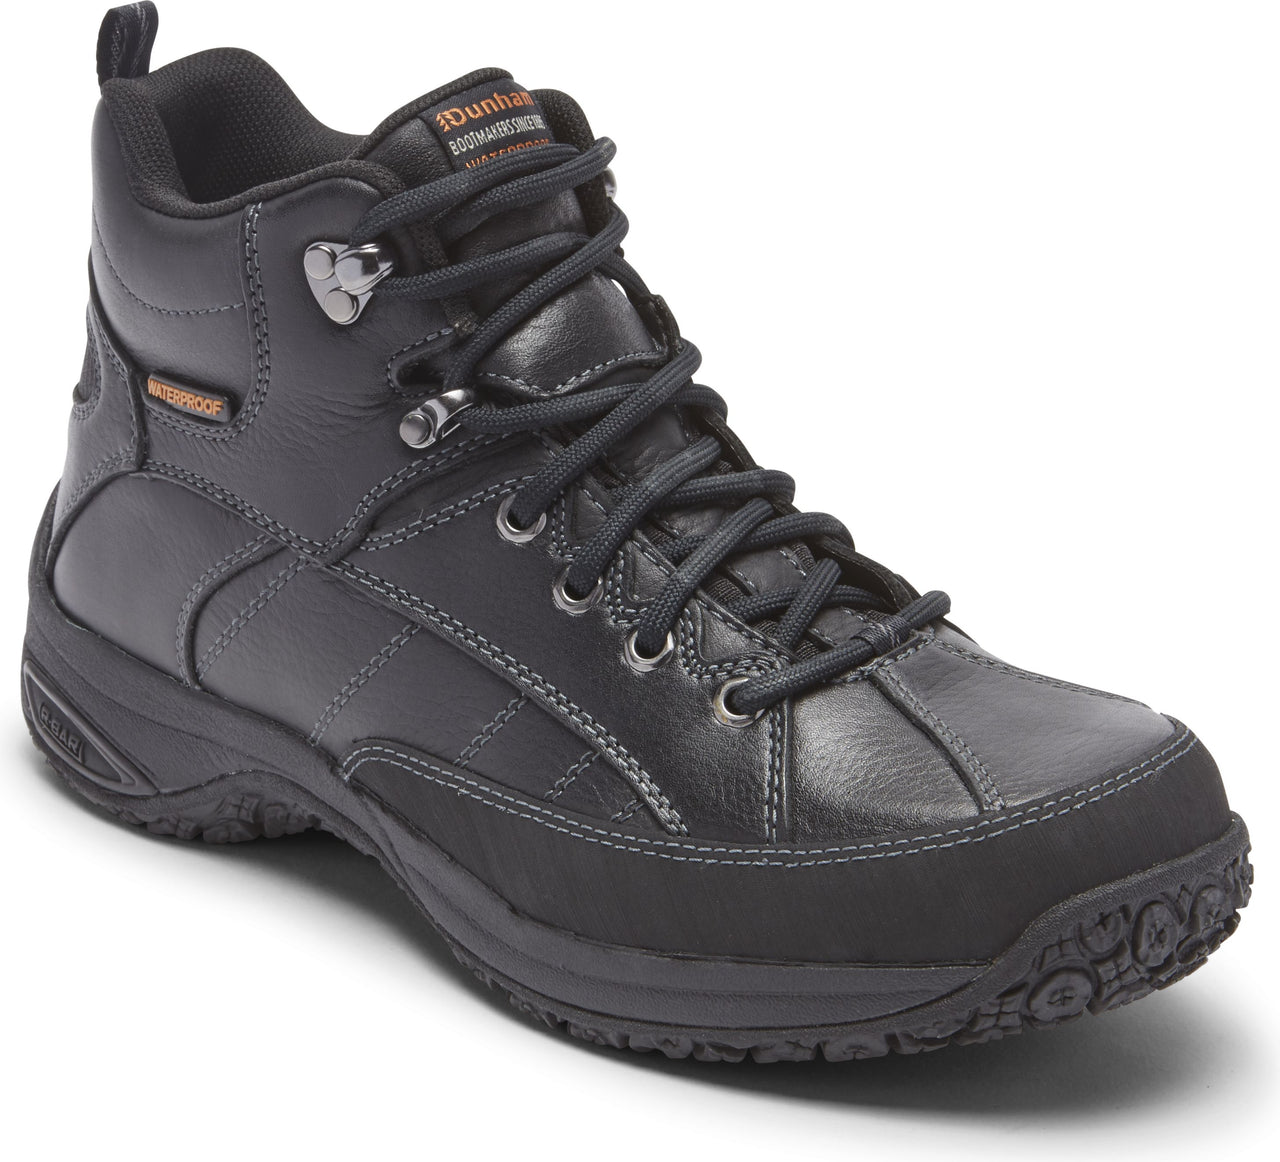 Dunhan Boots Ludlow Lawrence Mid Black - Wide